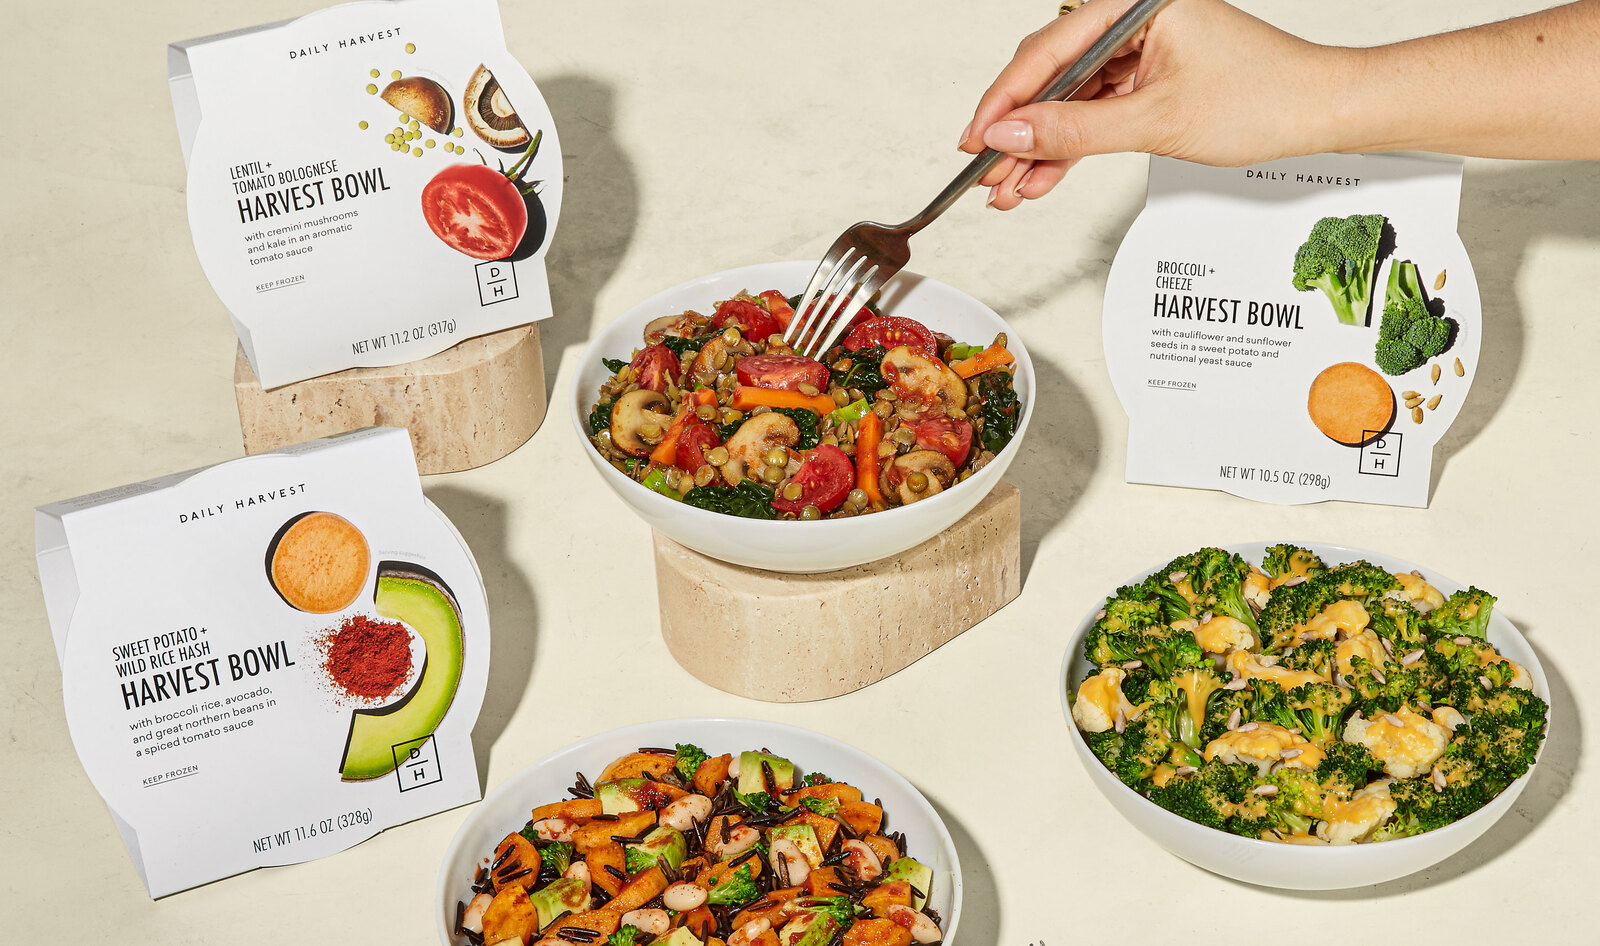 The Health Trend Continues at Target With 20 Daily Harvest Smoothies, Bowls, and Real Fruit Pops